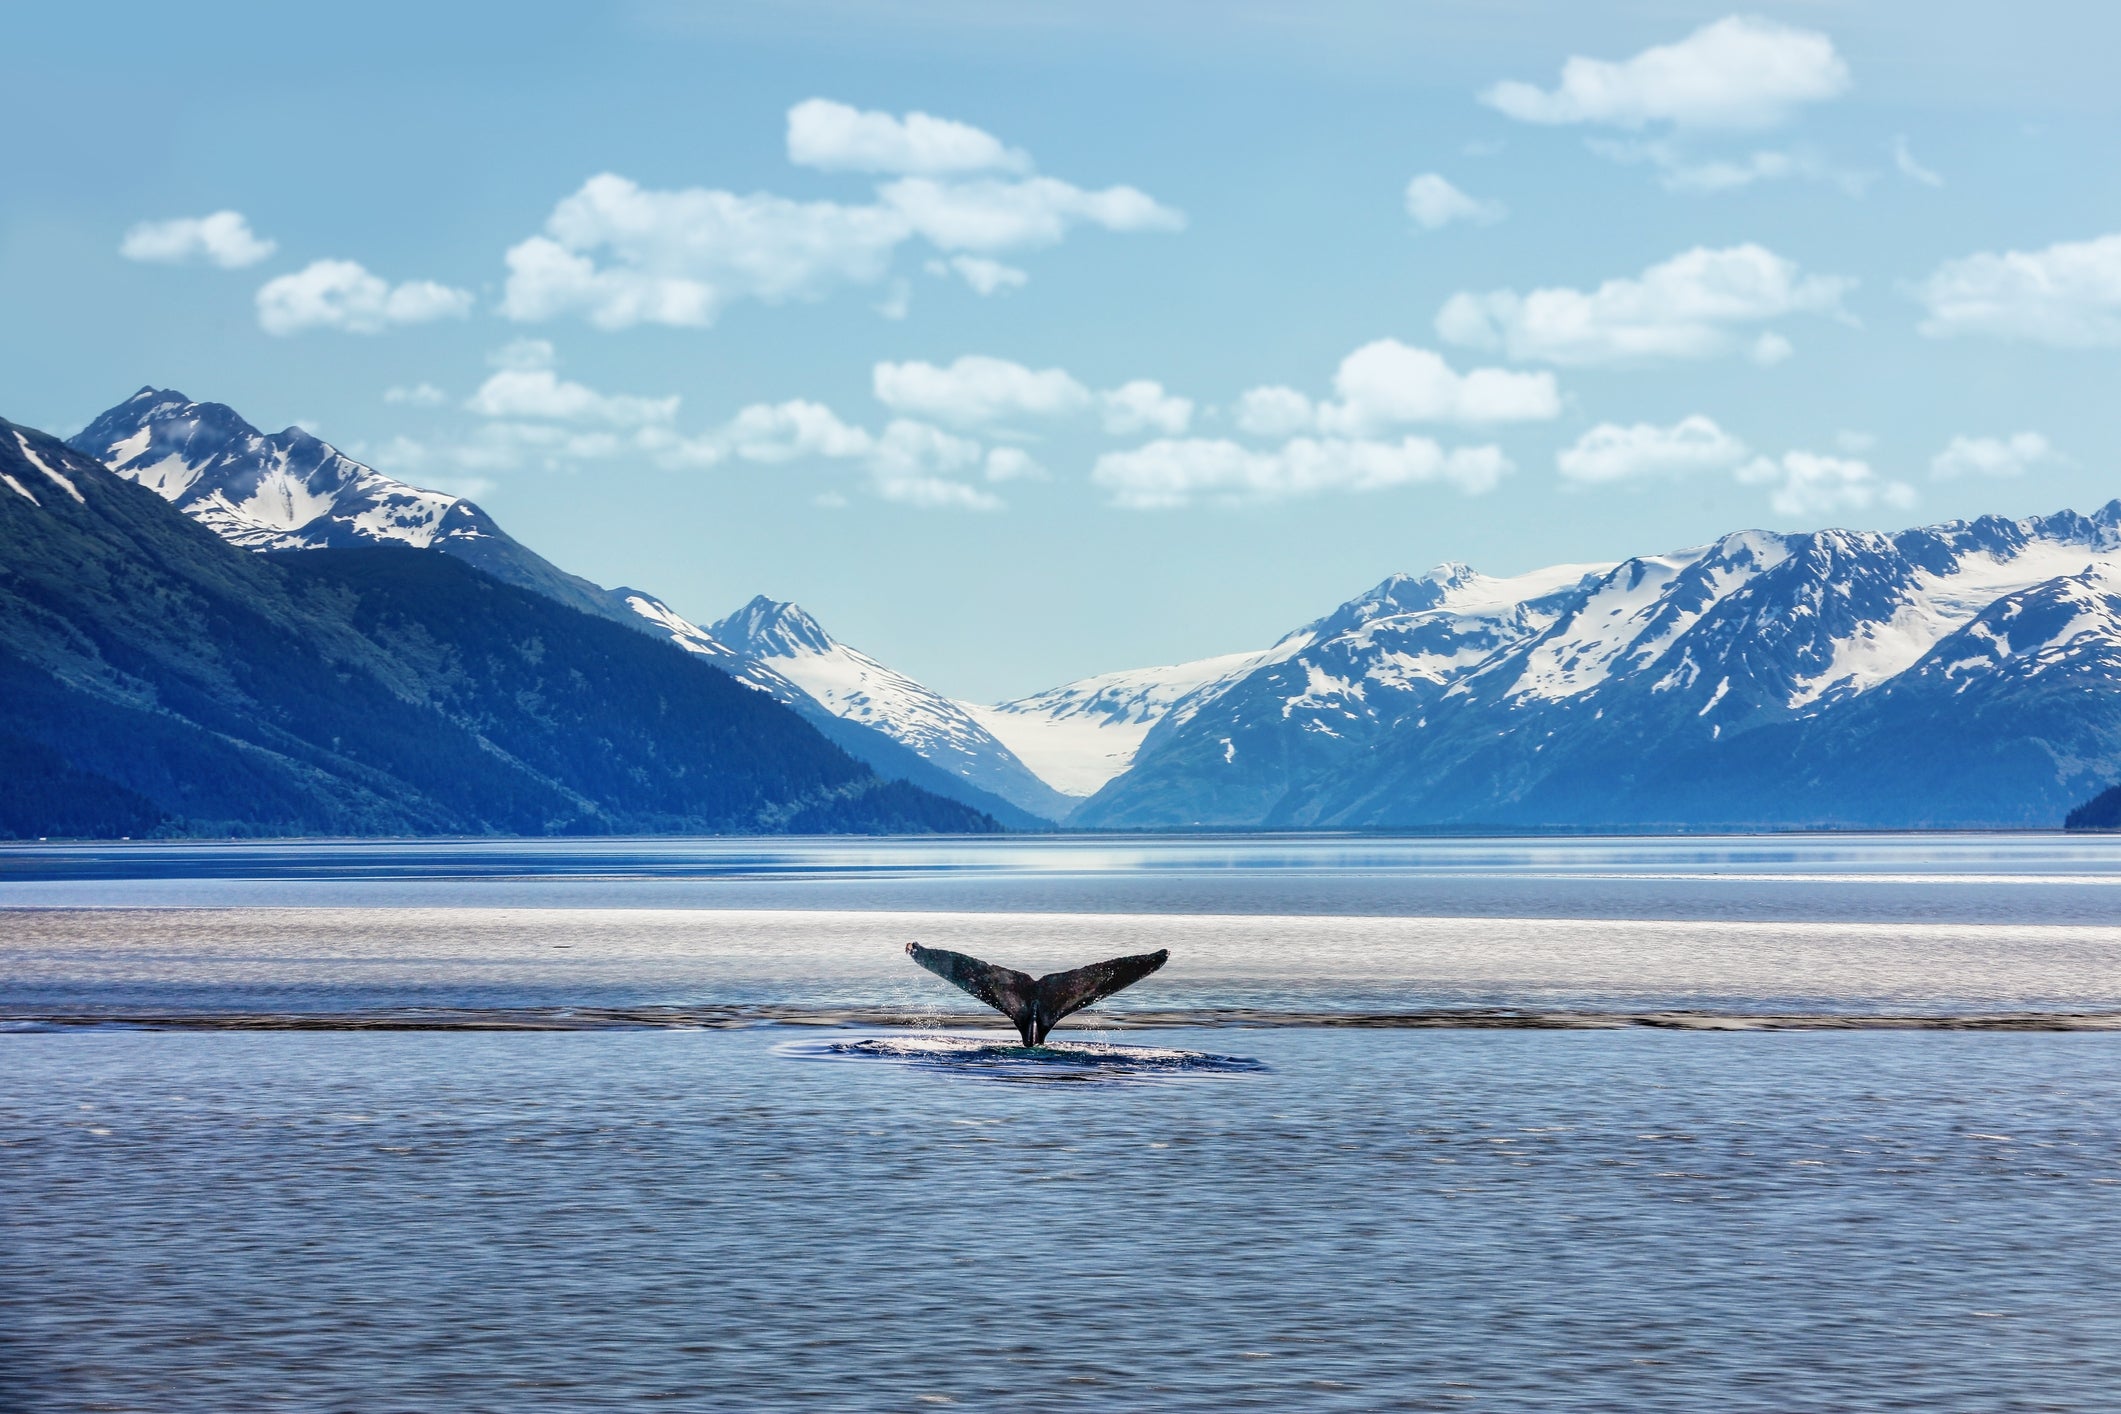 Bears, moose and marine animals including whales live in Alaska’s diverse landscape